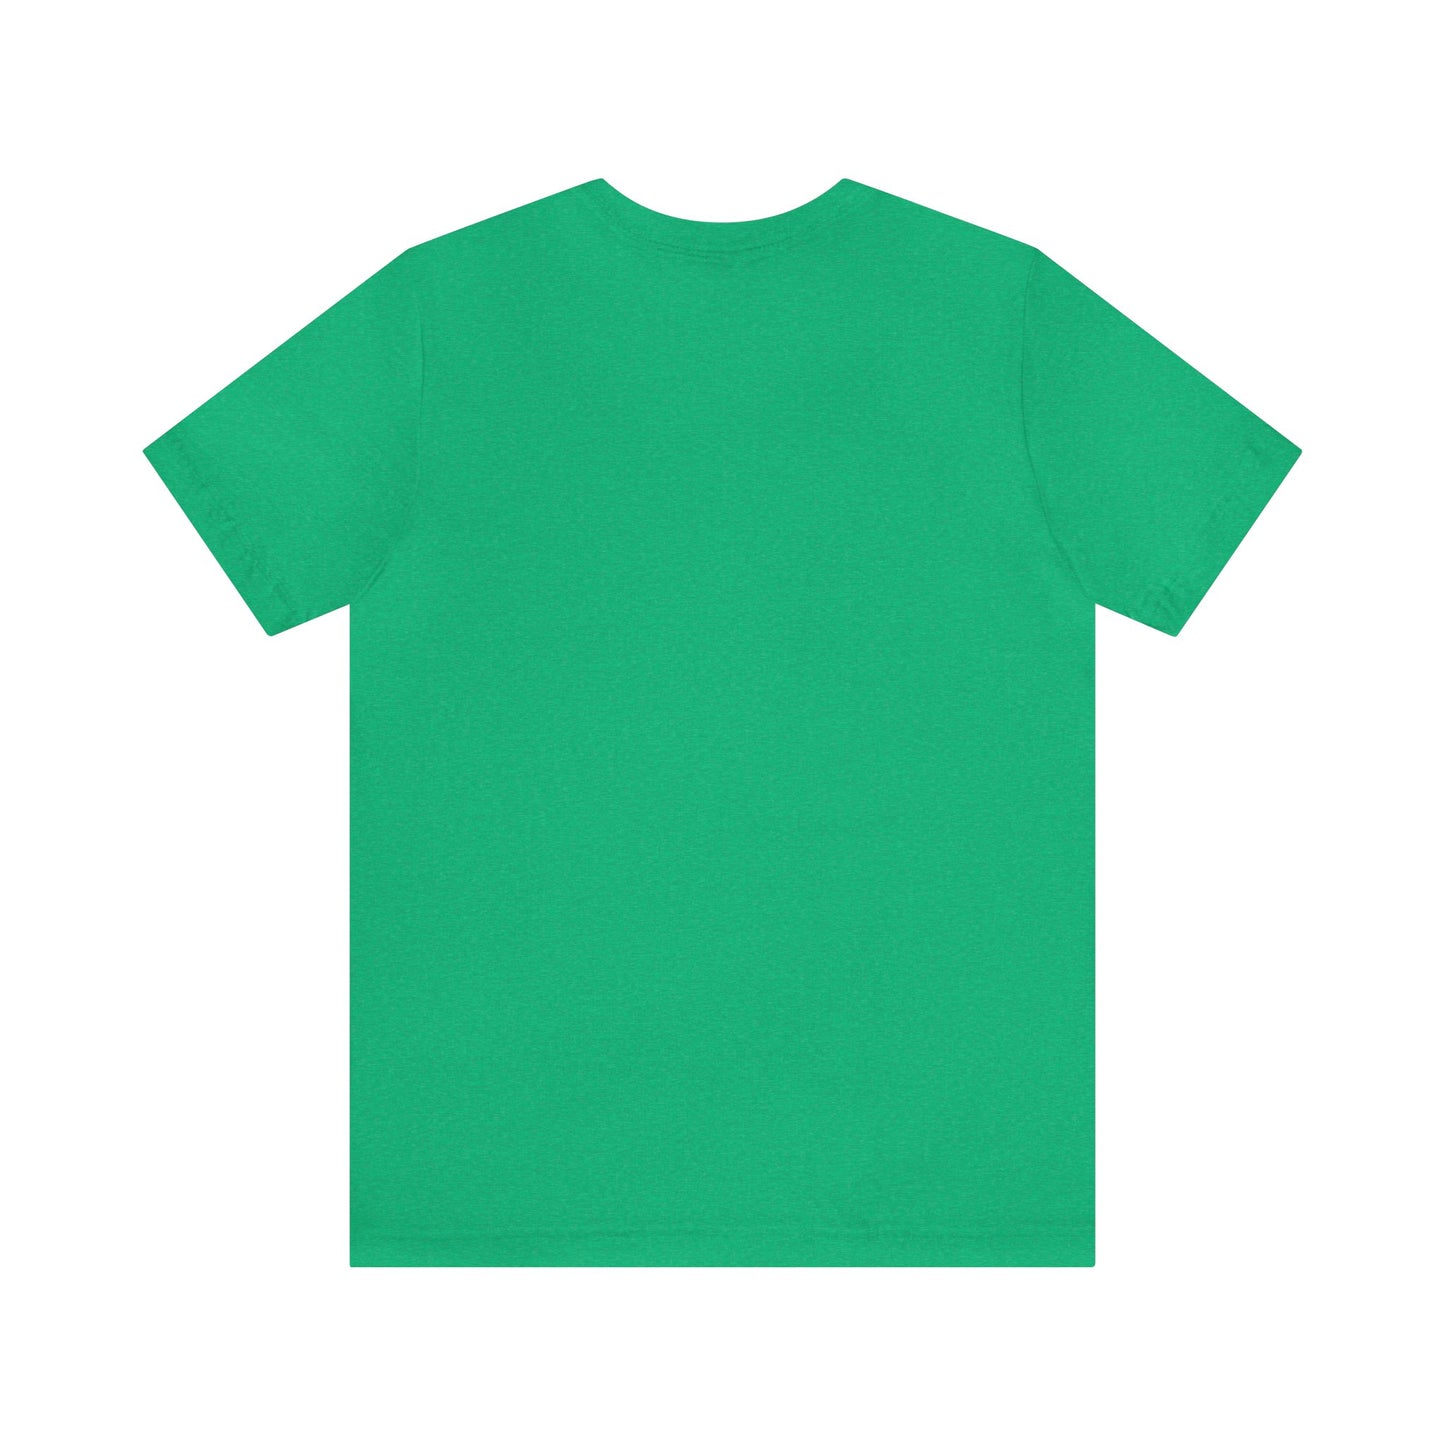 St Patrick's Day Party Shirt St Paddy Shirt Clover Shirt